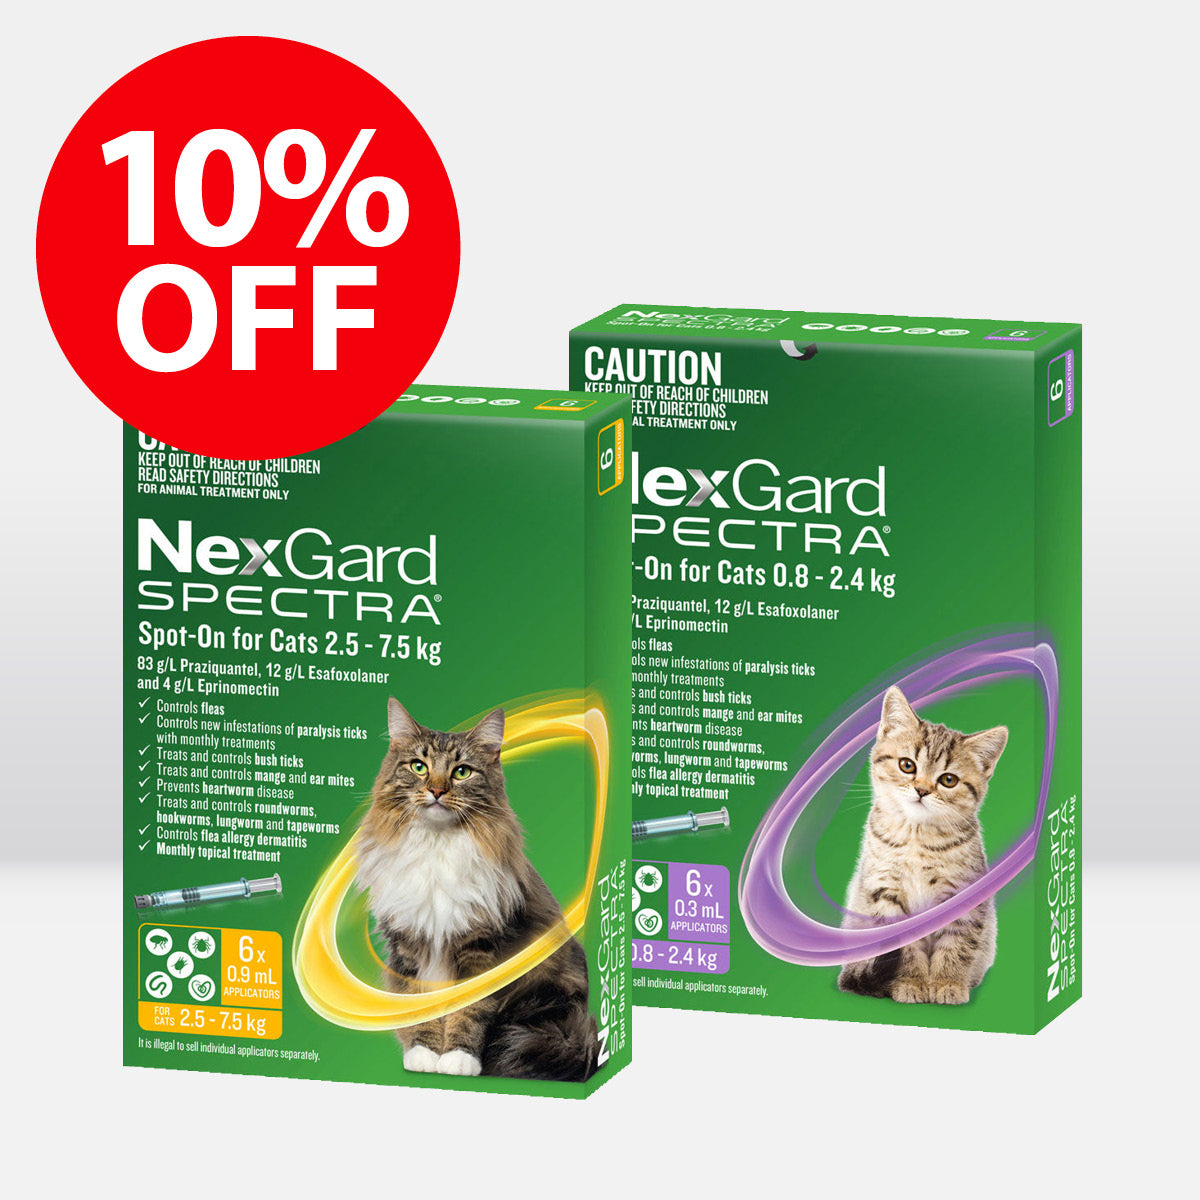 NexGard Spectra Spot-On for Cats ON SALE NOW